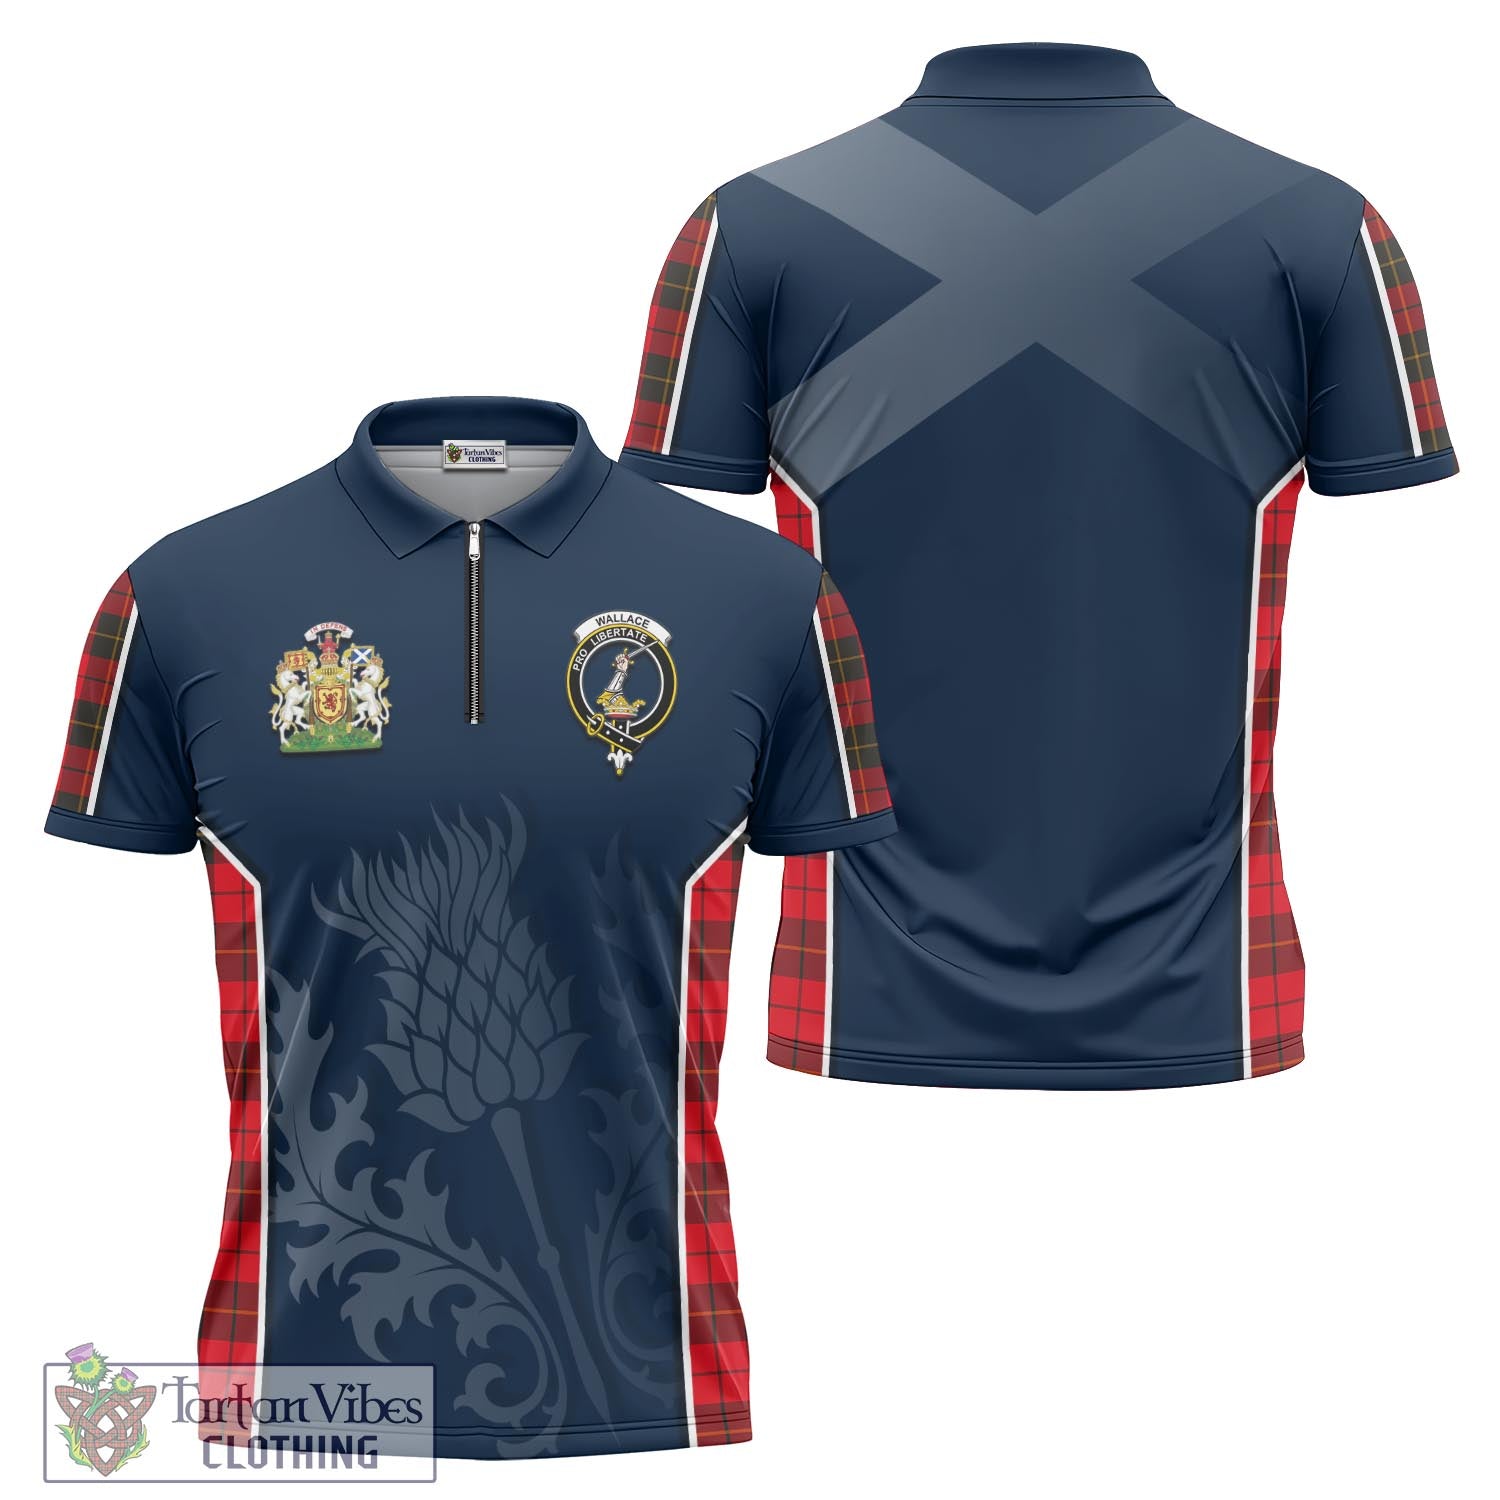 Tartan Vibes Clothing Wallace Weathered Tartan Zipper Polo Shirt with Family Crest and Scottish Thistle Vibes Sport Style